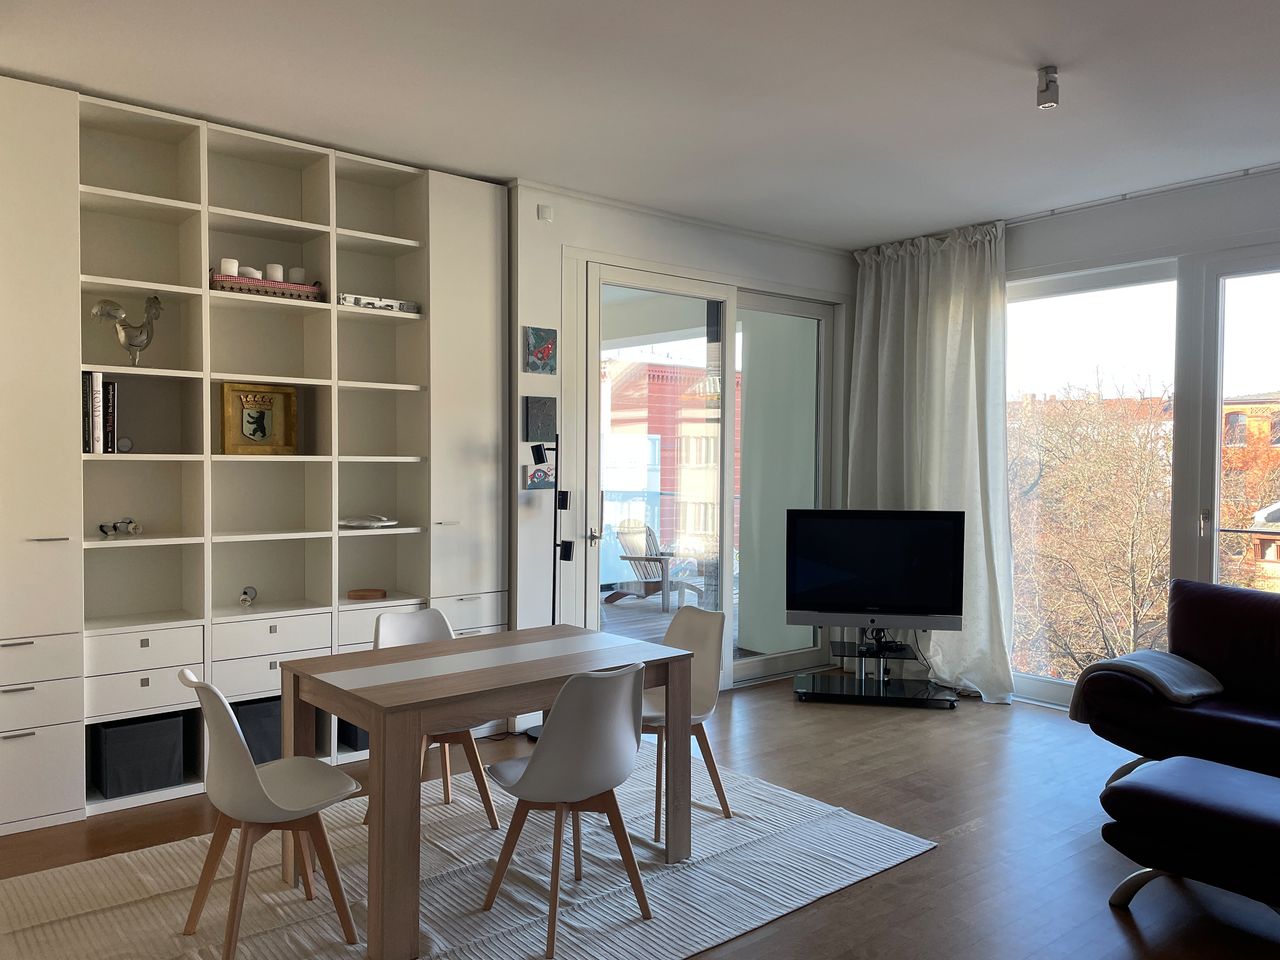 141 | 2 room apartment in Prenzlauer Berg with gorgeous city views